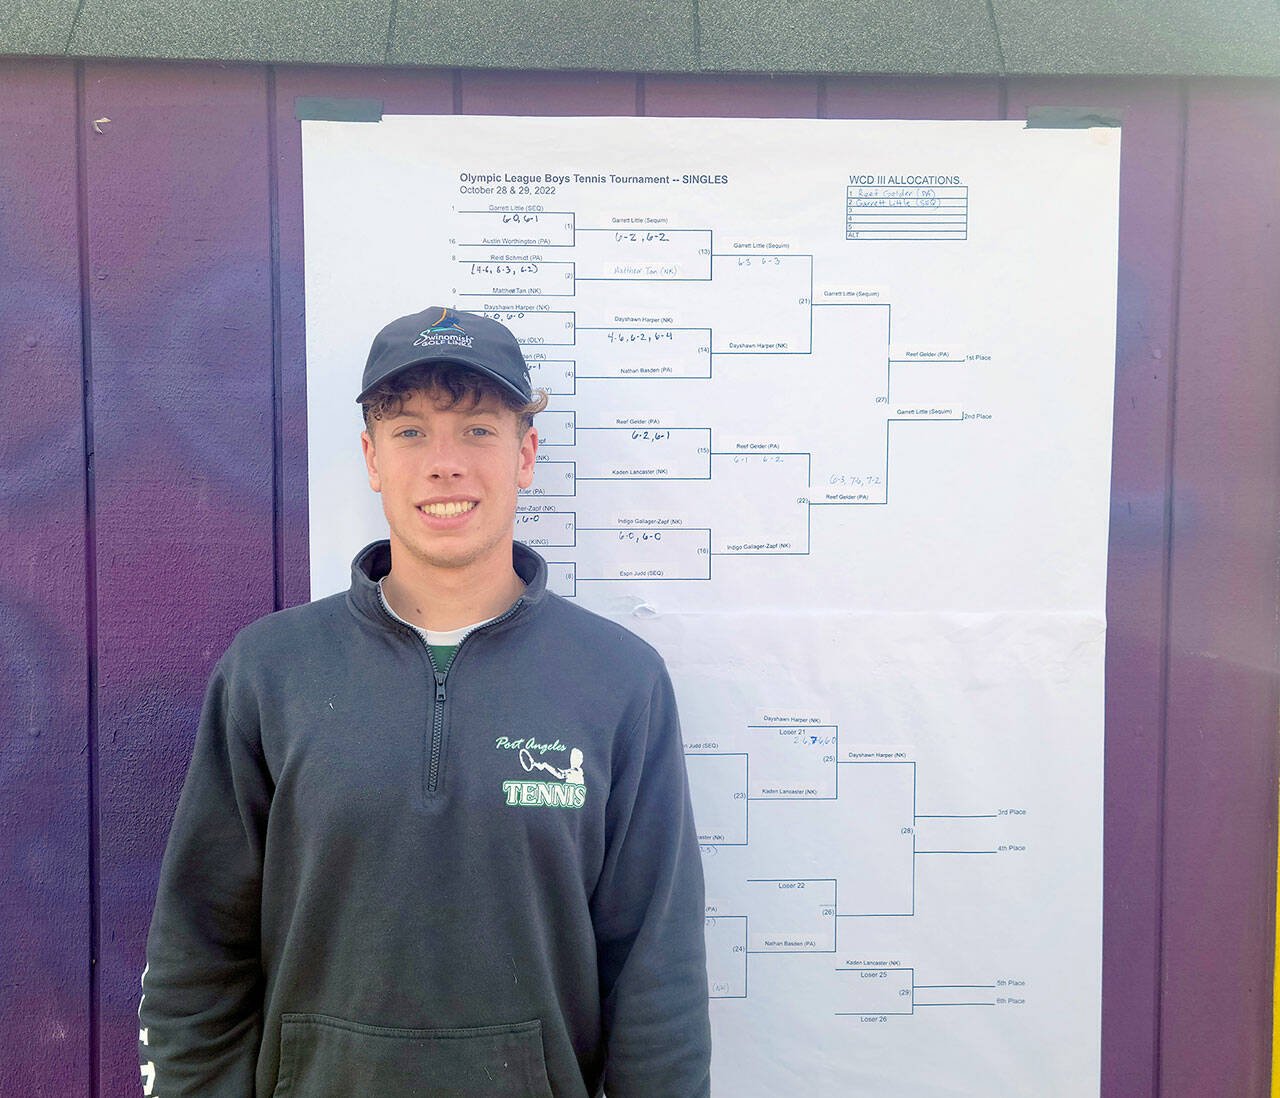 Port Angeles Tennis Port Angeles’ No. 1 singles player Reef Gelder knocked off tournament top seed Garrett Little of Sequim 6-4, 7-6 to win the Olympic League Boys Tennis Singles Championship on Tuesday at North Kitsap High School.